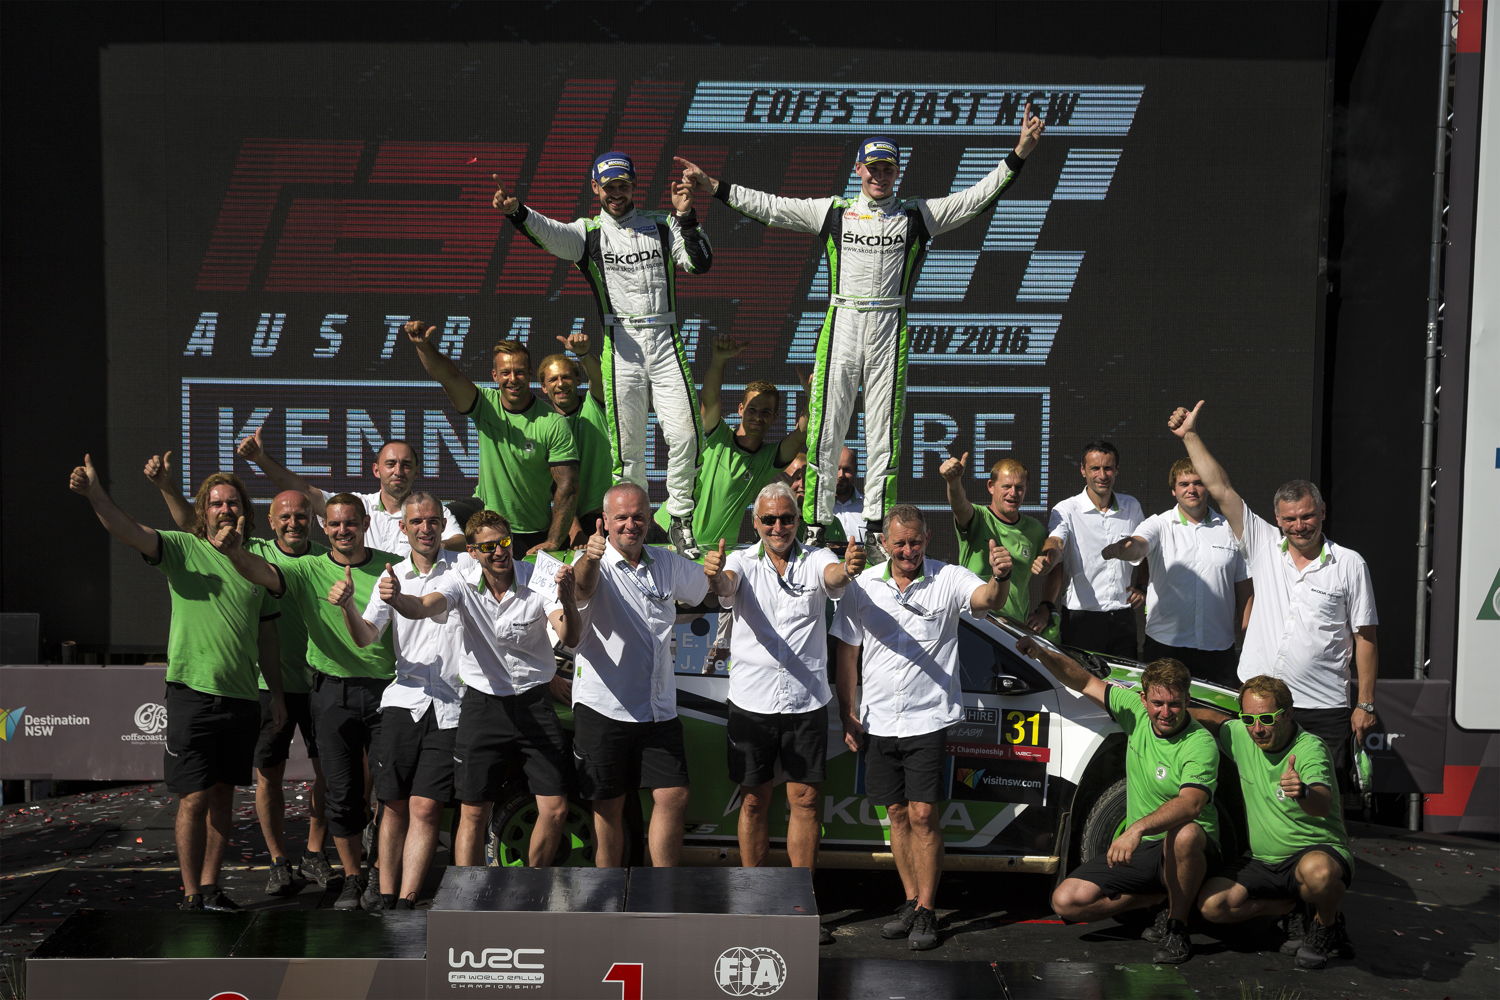 Victory for Esapekka Lappi/Janne Ferm (FIN/FIN) in the Drivers’ and Co-Drivers’ competition in the FIA World Rally Championship (WRC 2) is a triumph for the entire ŠKODA Motorsport team.